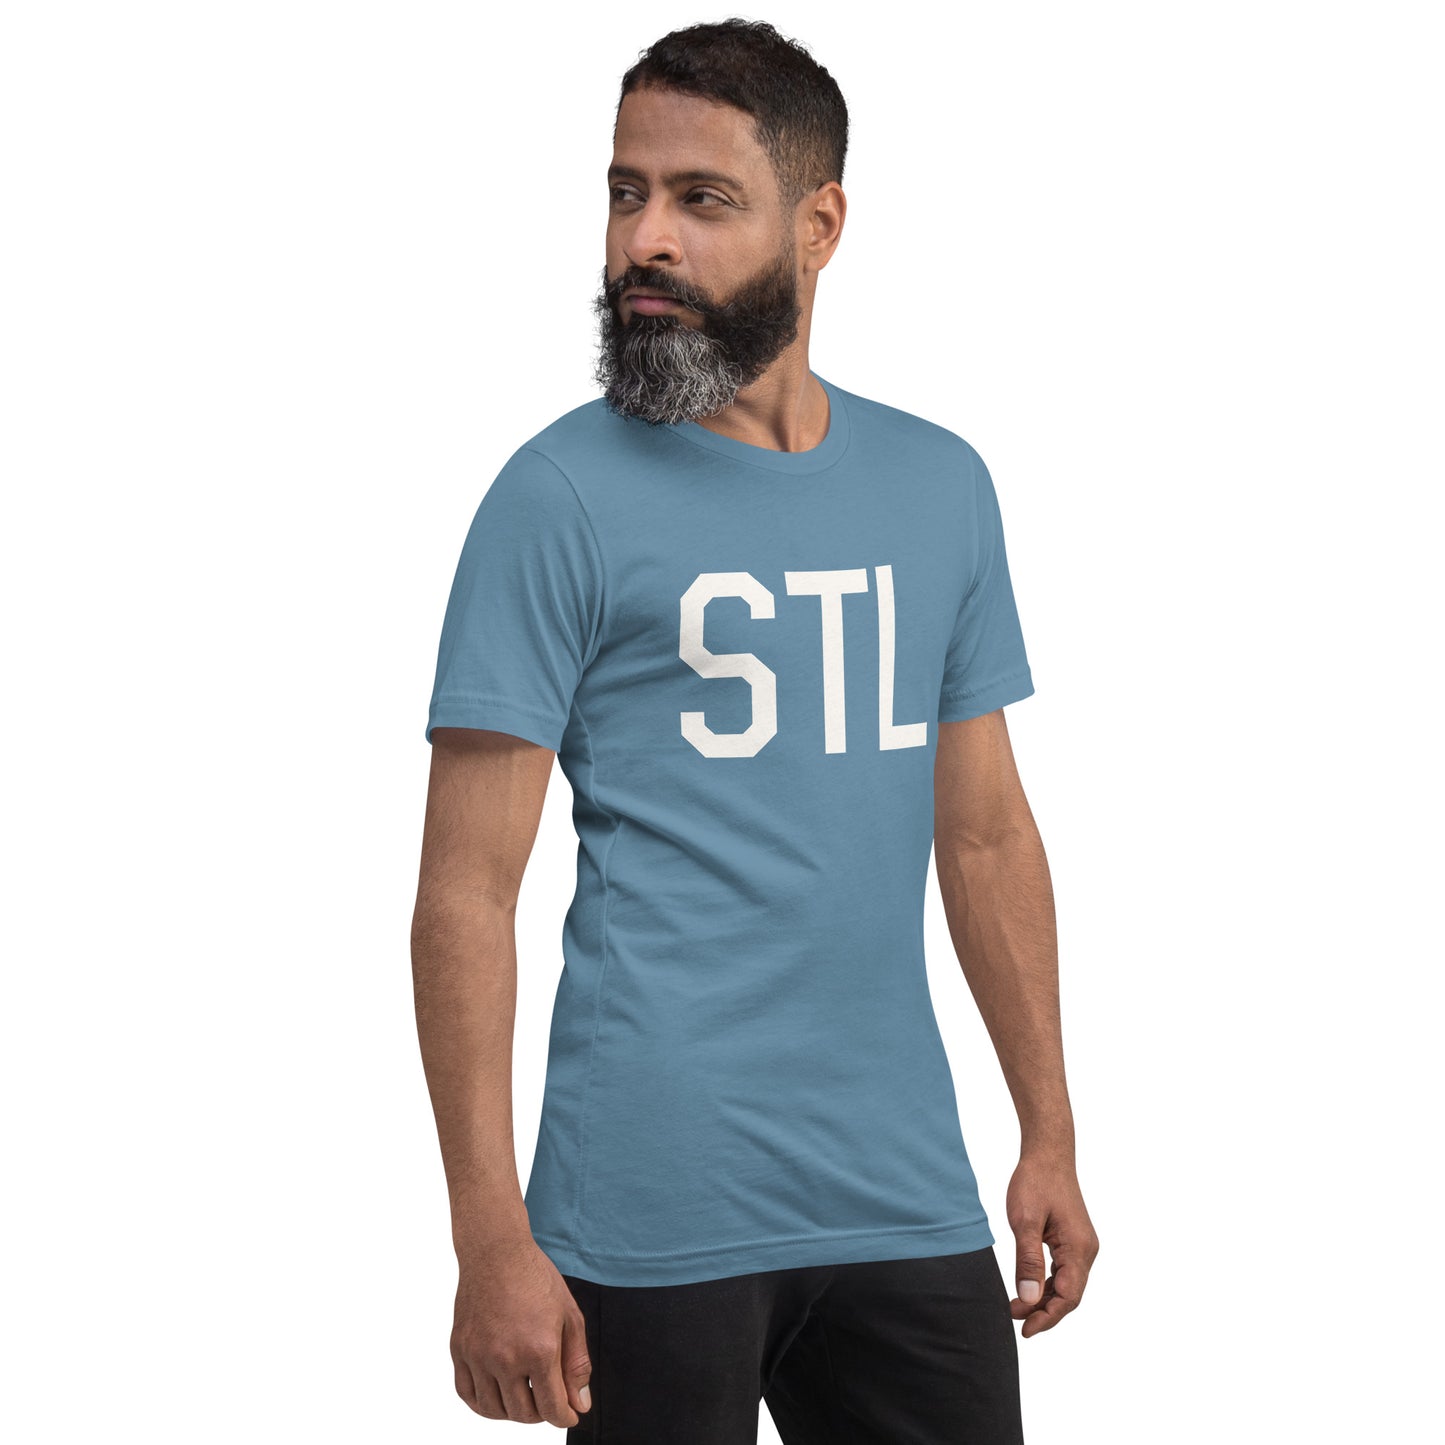 Airport Code T-Shirt - White Graphic • STL St. Louis • YHM Designs - Image 10